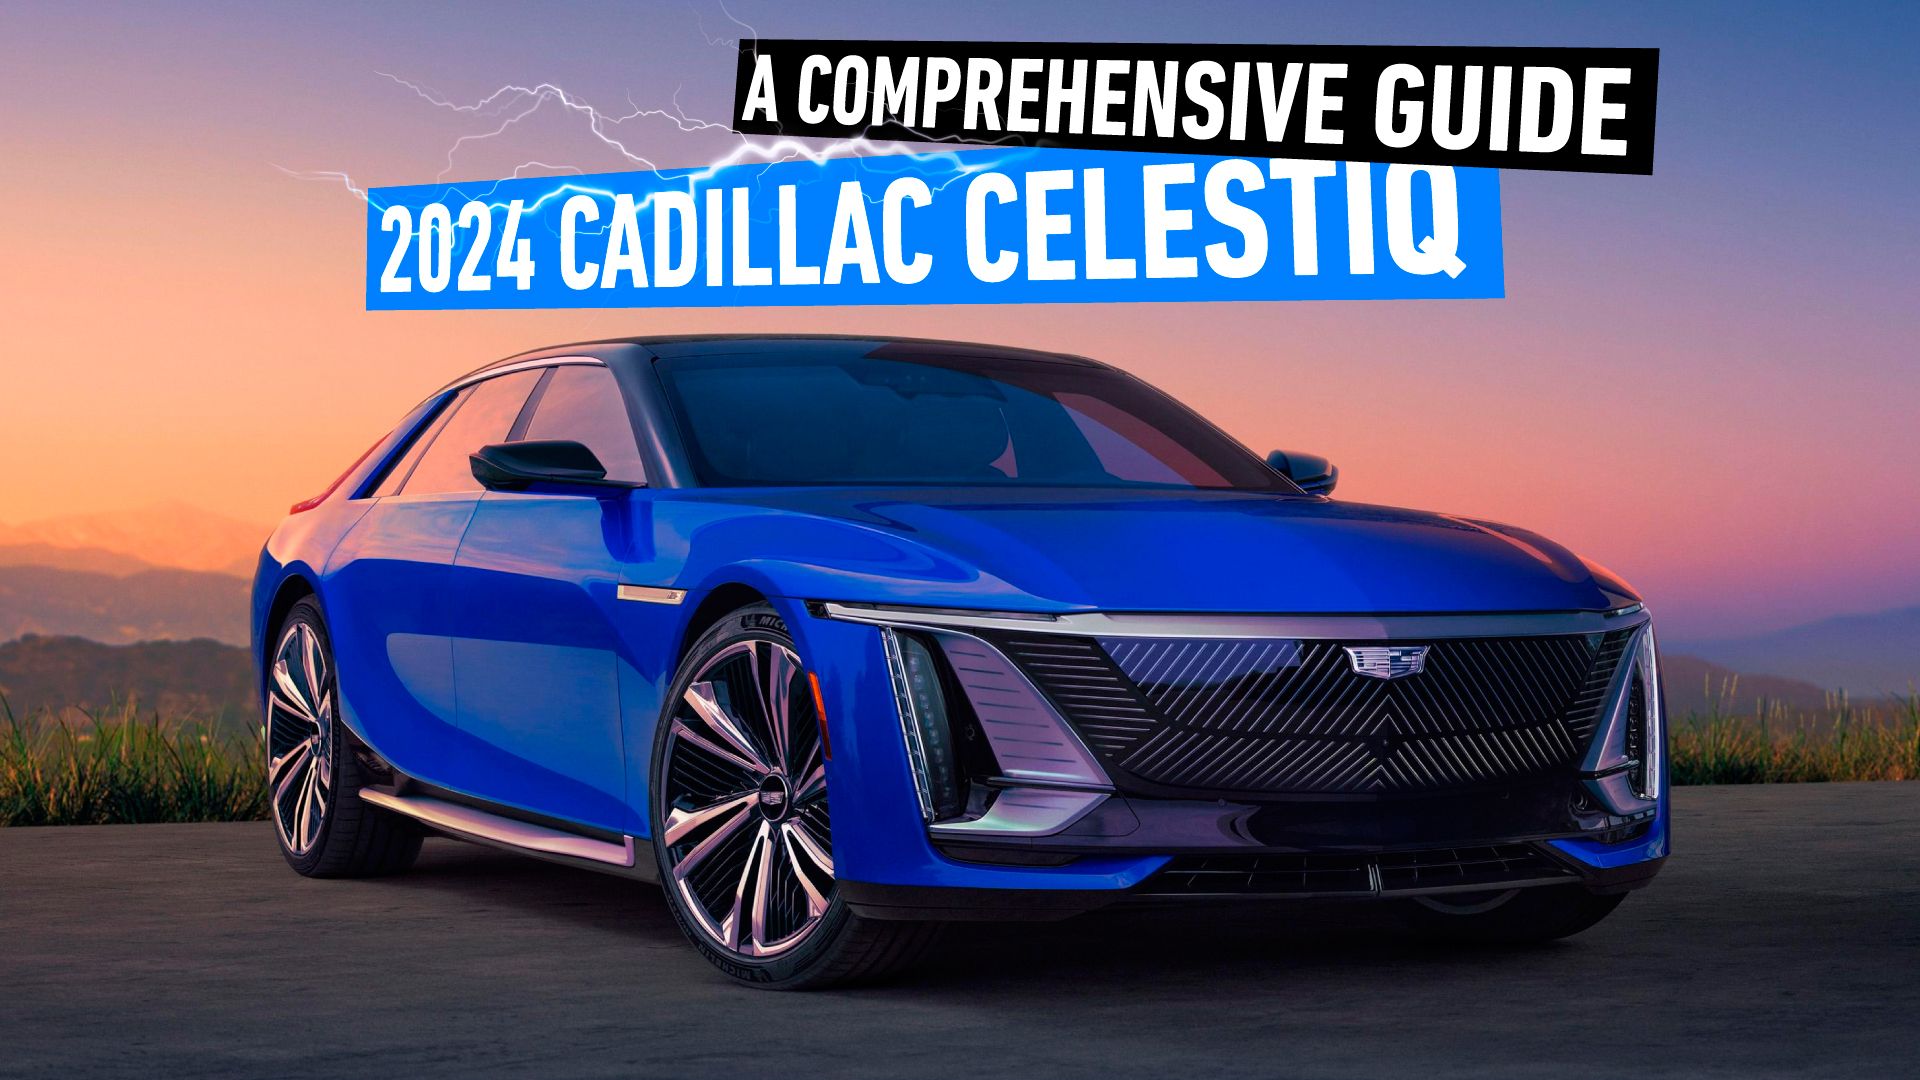 2024 CadillacCelestiq with custom overlay for a guide